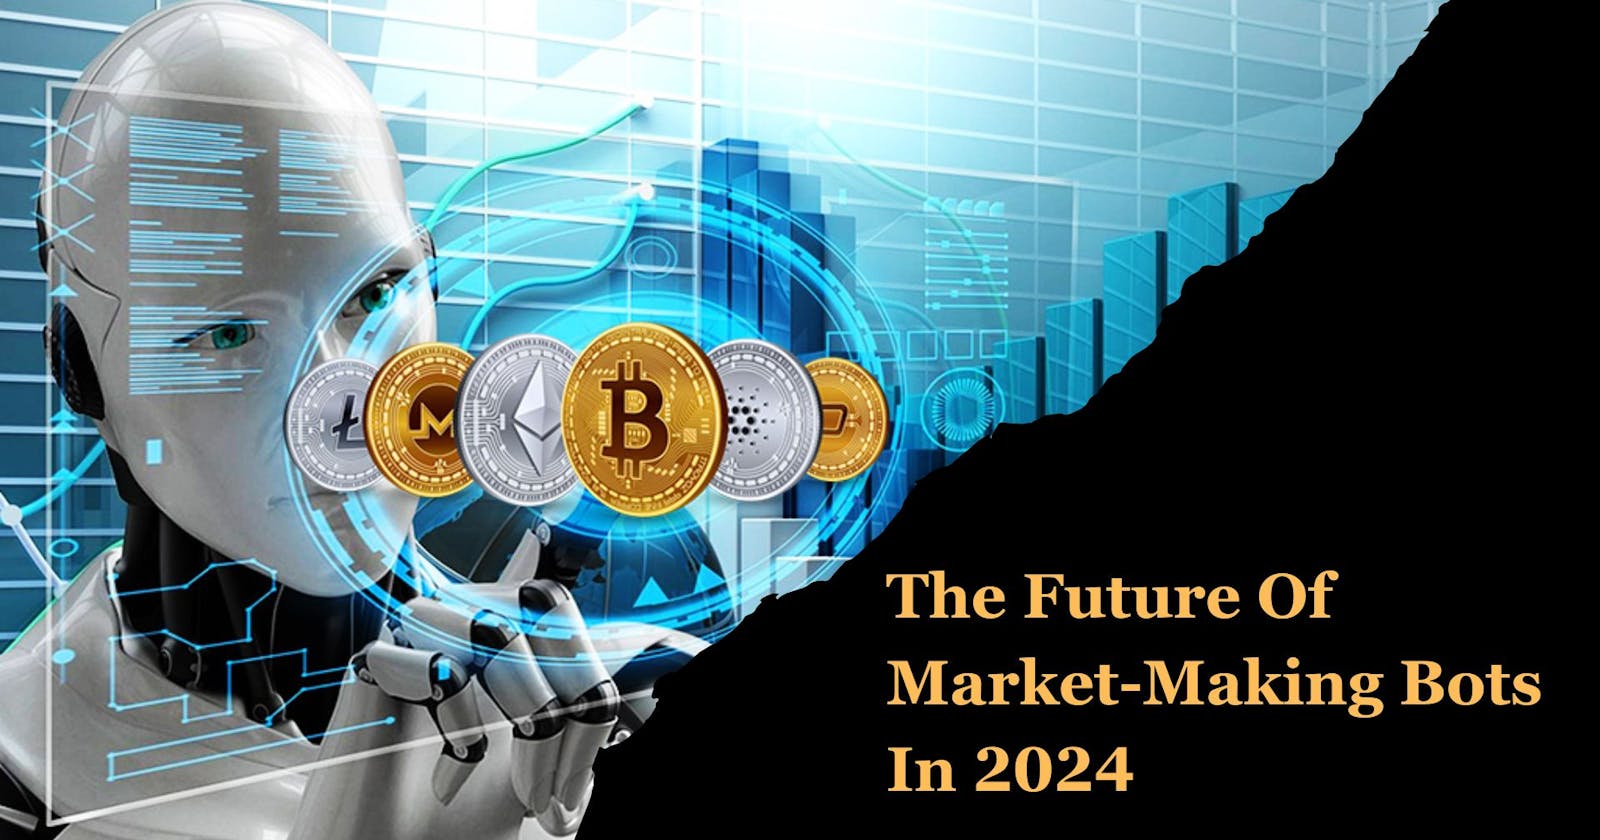 The Future Of Market-Making Bots In 2024